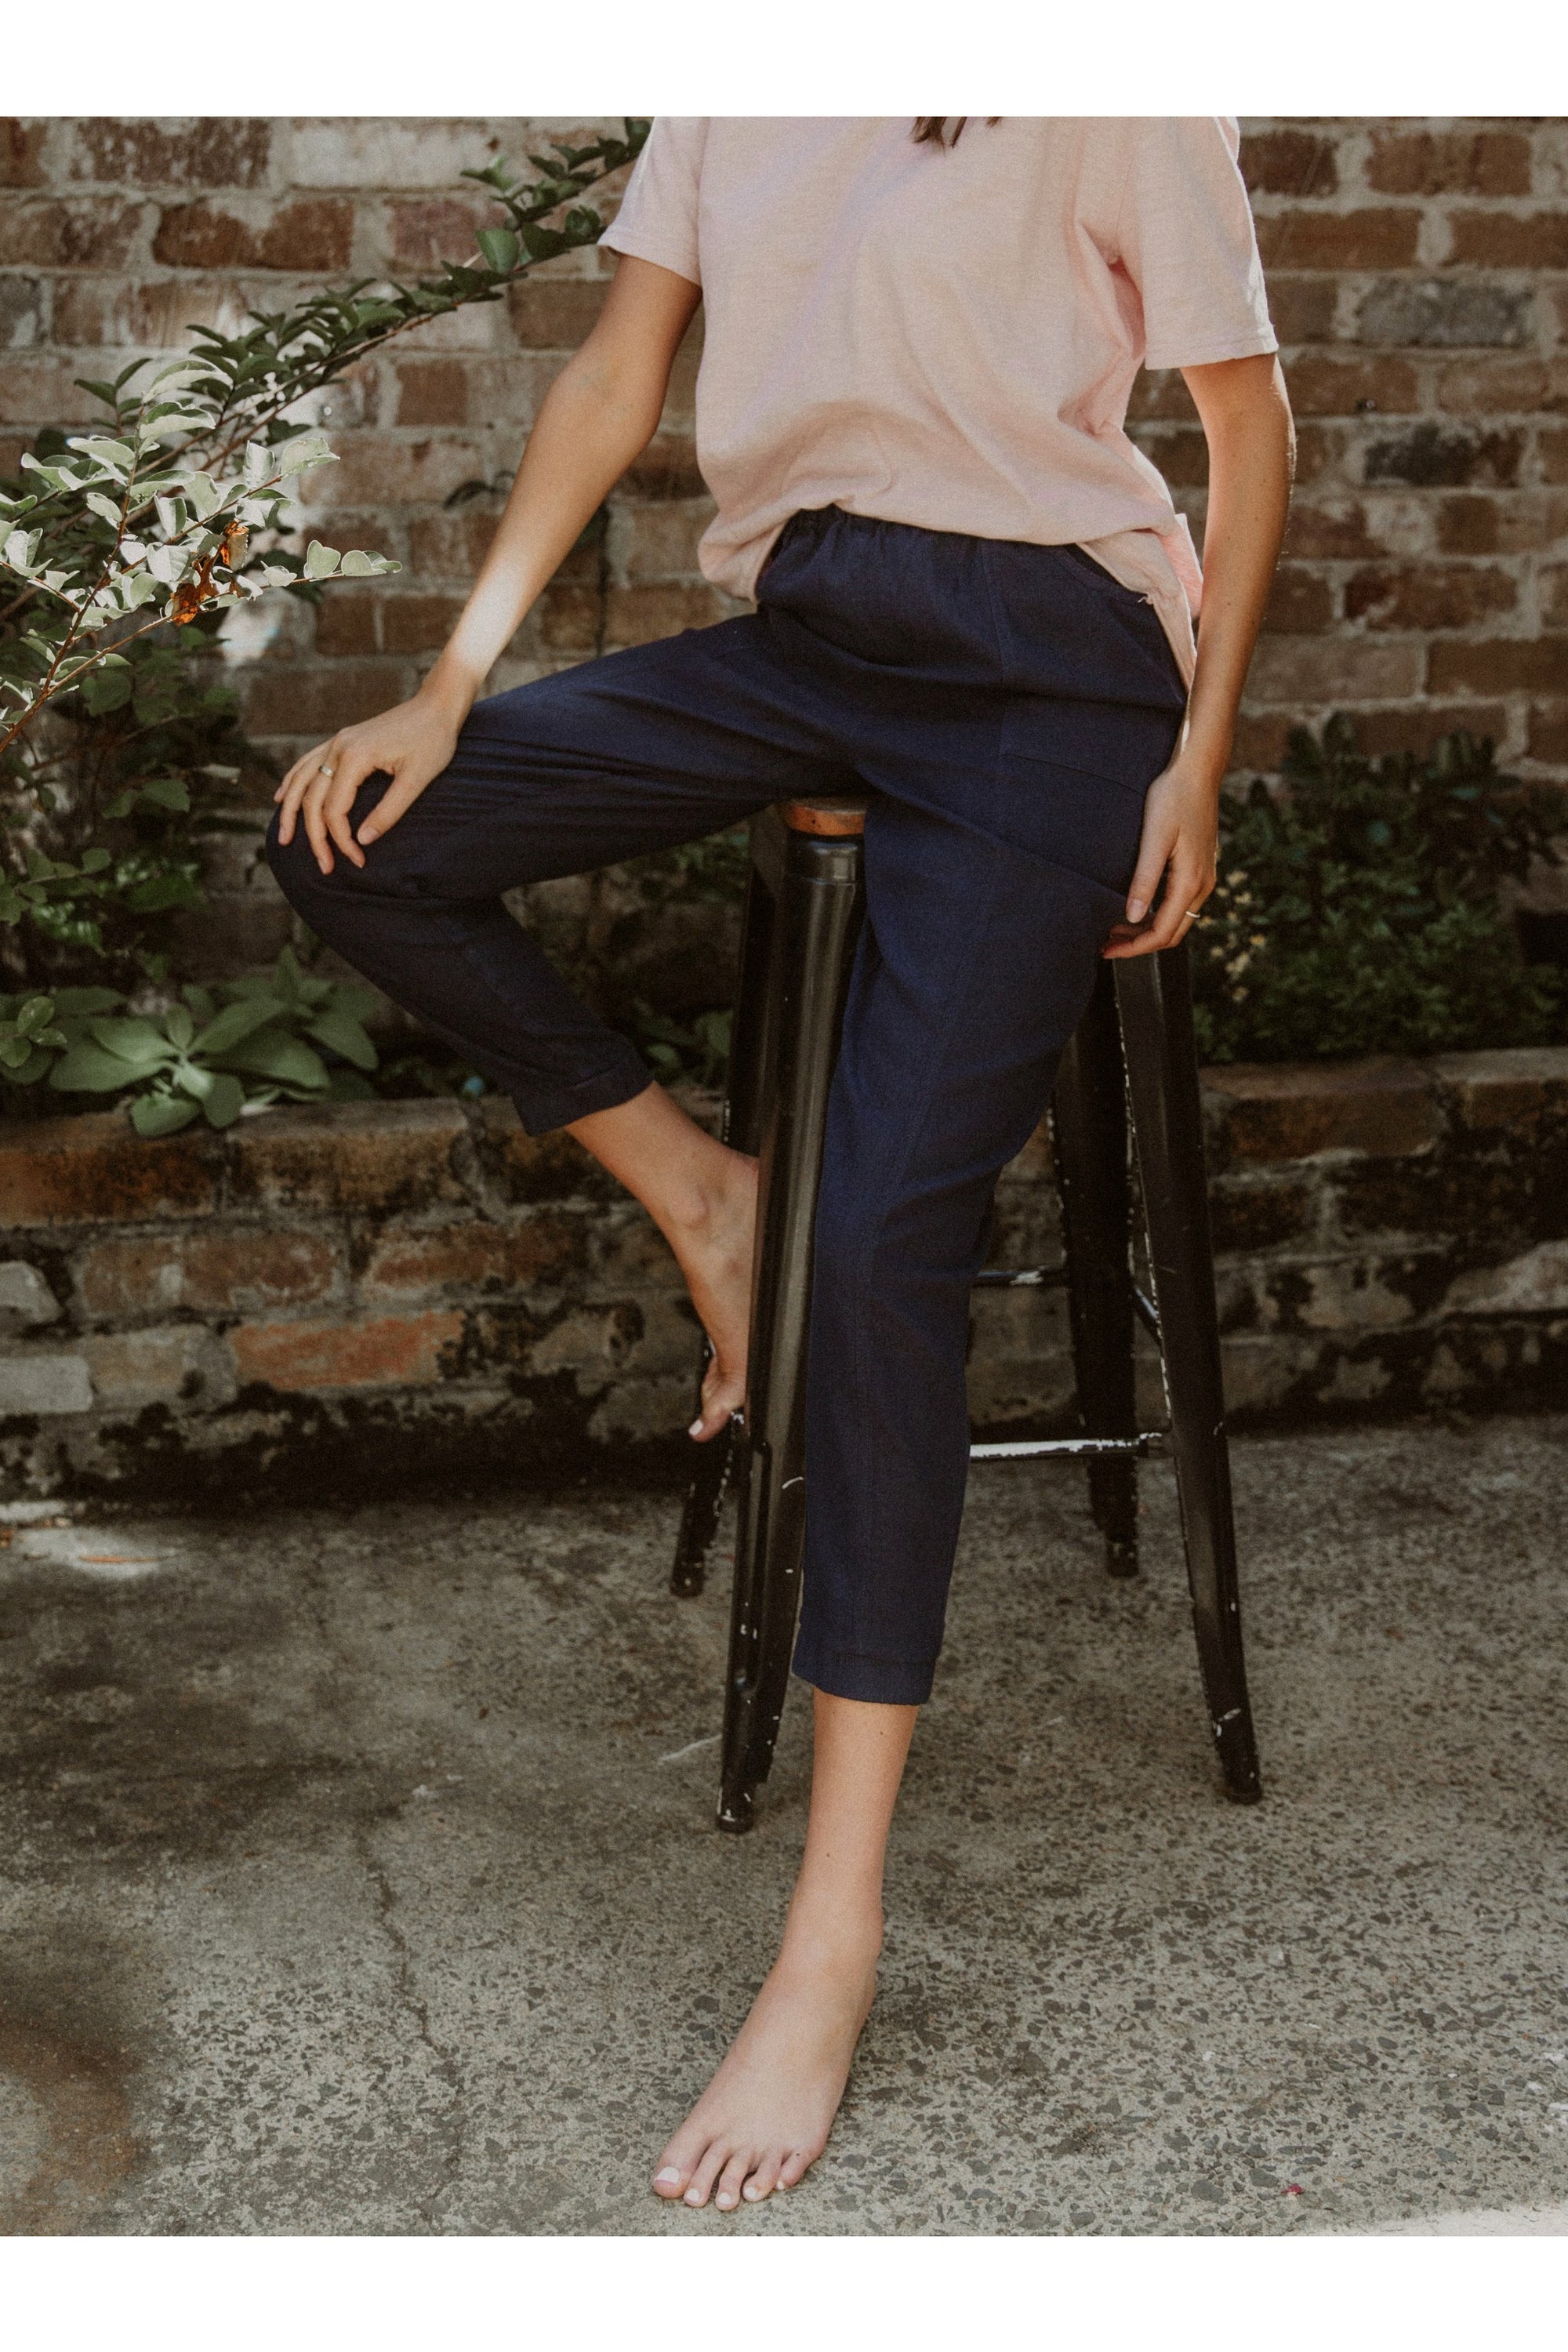 M.I.L.S.O.N Maddison Linen Pant in Navy